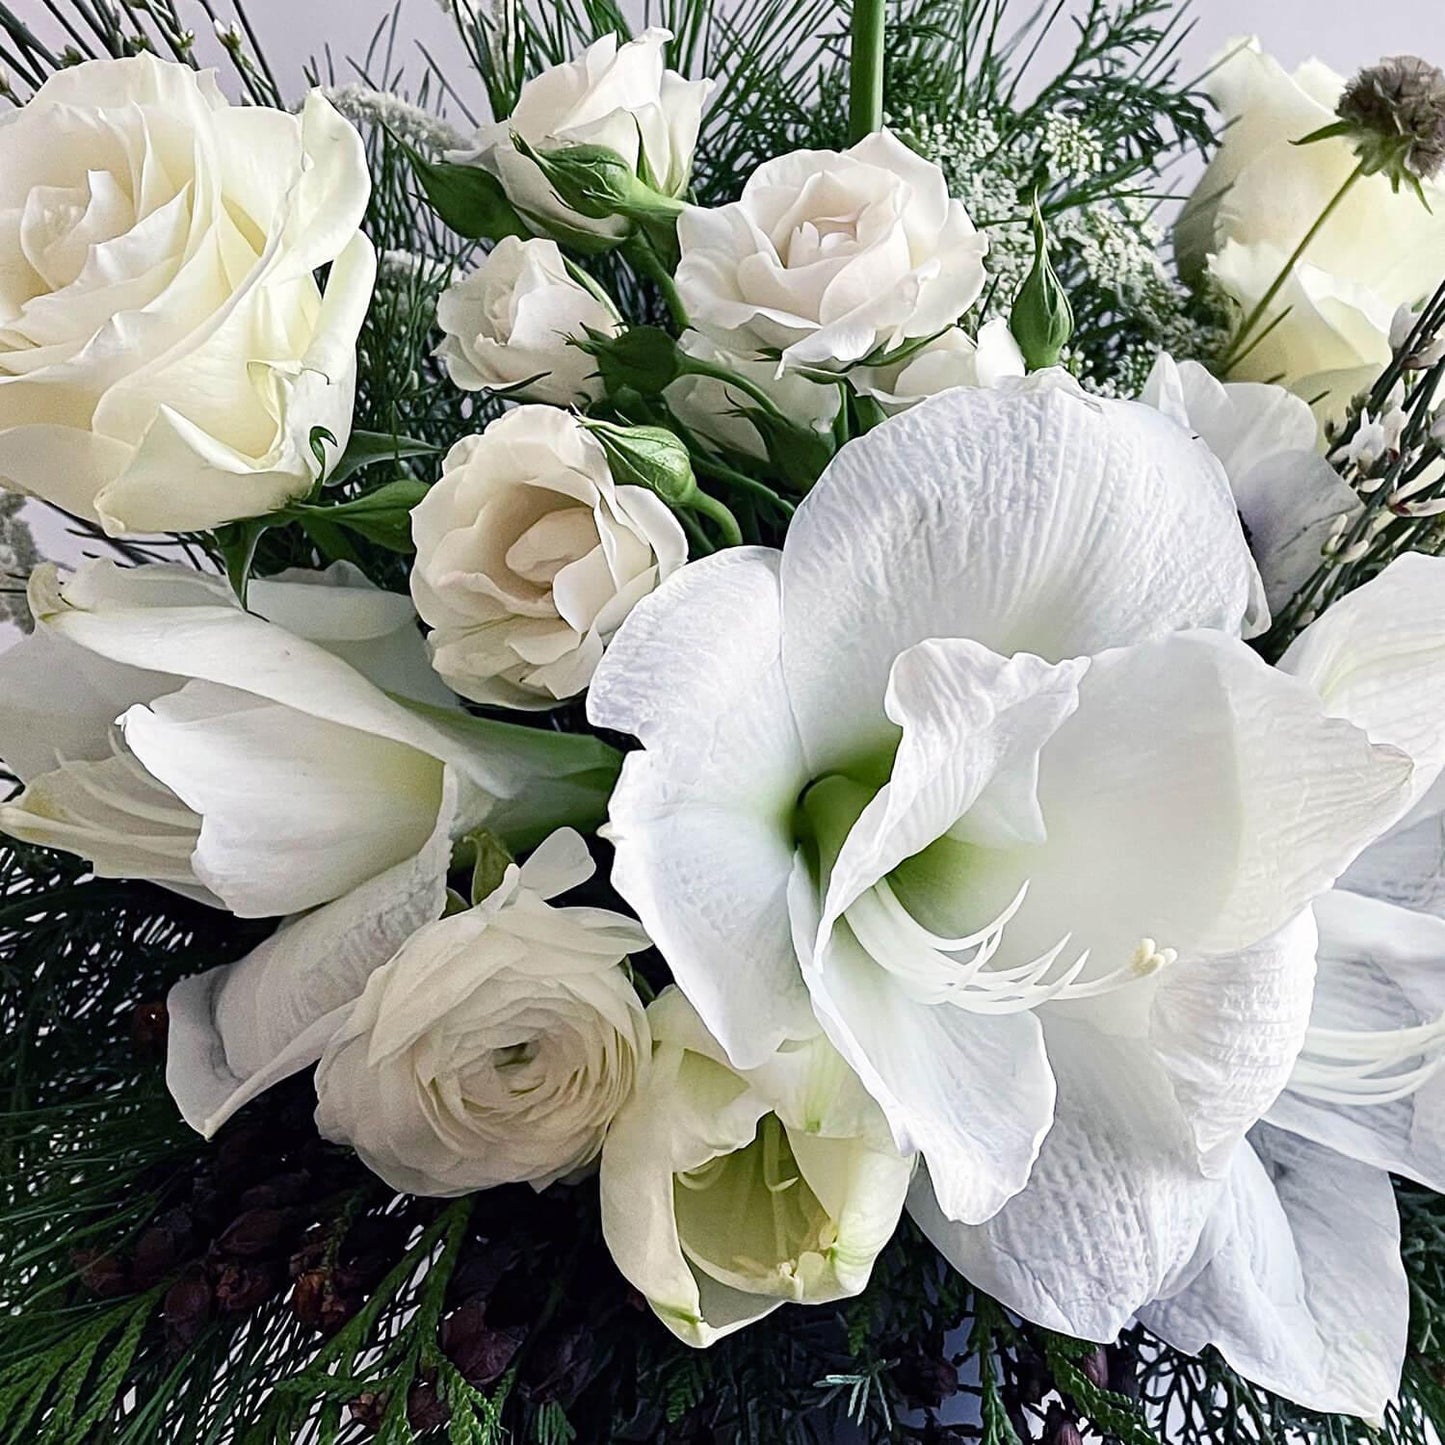 Close-up image of a bouquet featuring crisp white blooms paired with deep winter evergreens for a classic holiday look. Order online for same-day flower delivery from the best florist in Toronto near you.